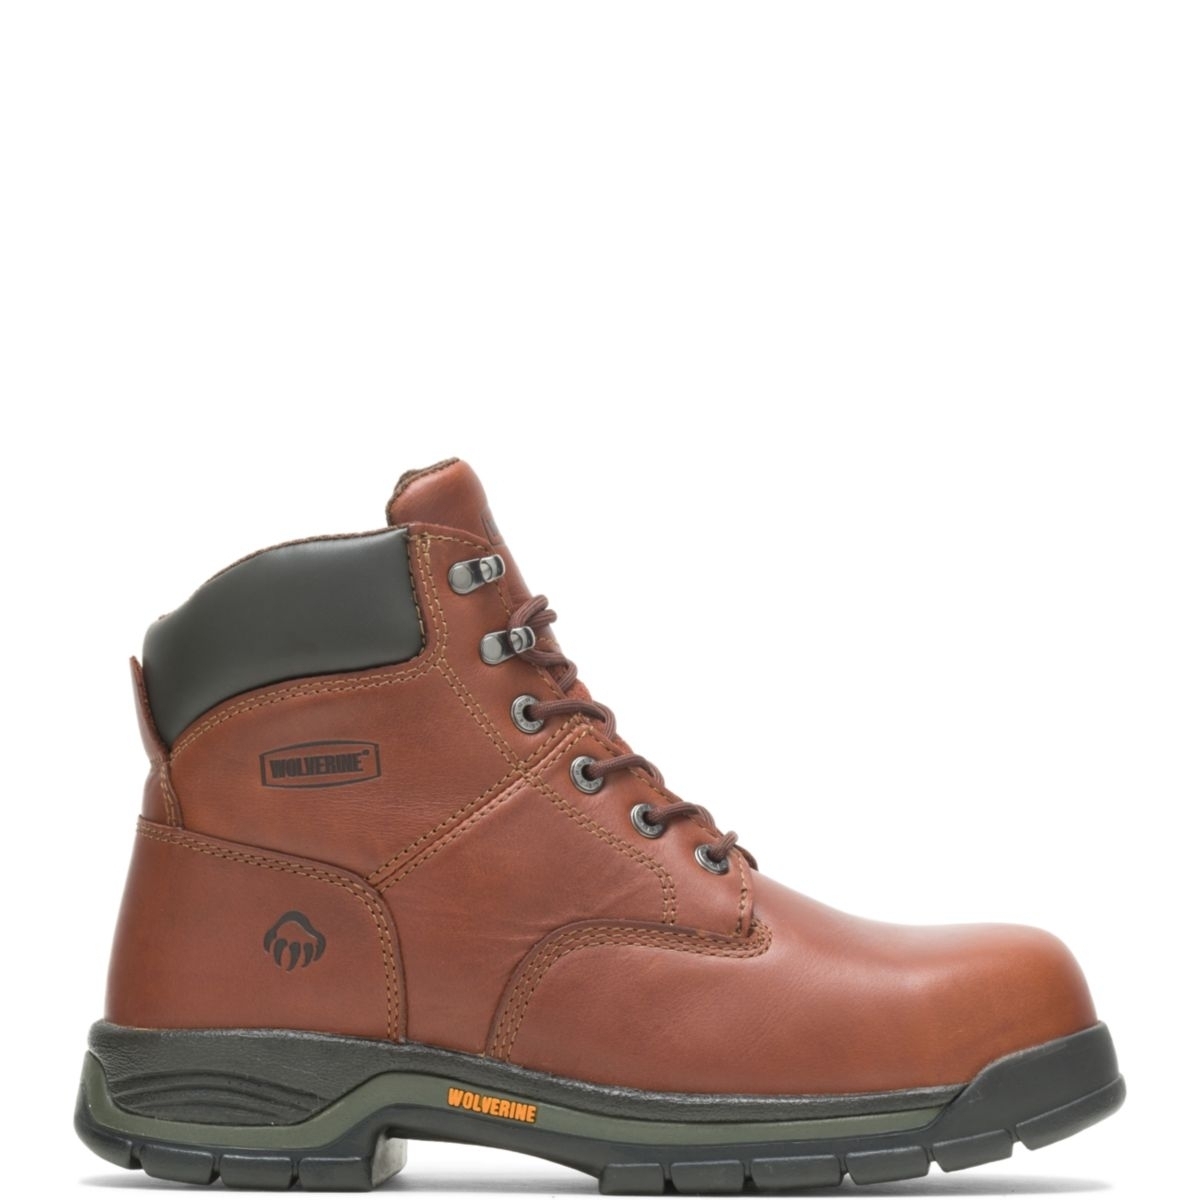 WOLVERINE Men's Harrison 6 Lace-Up SoftToe Work Boot Brown - W04906 Varies BROWN - BROWN, 11.5 XX-Wide